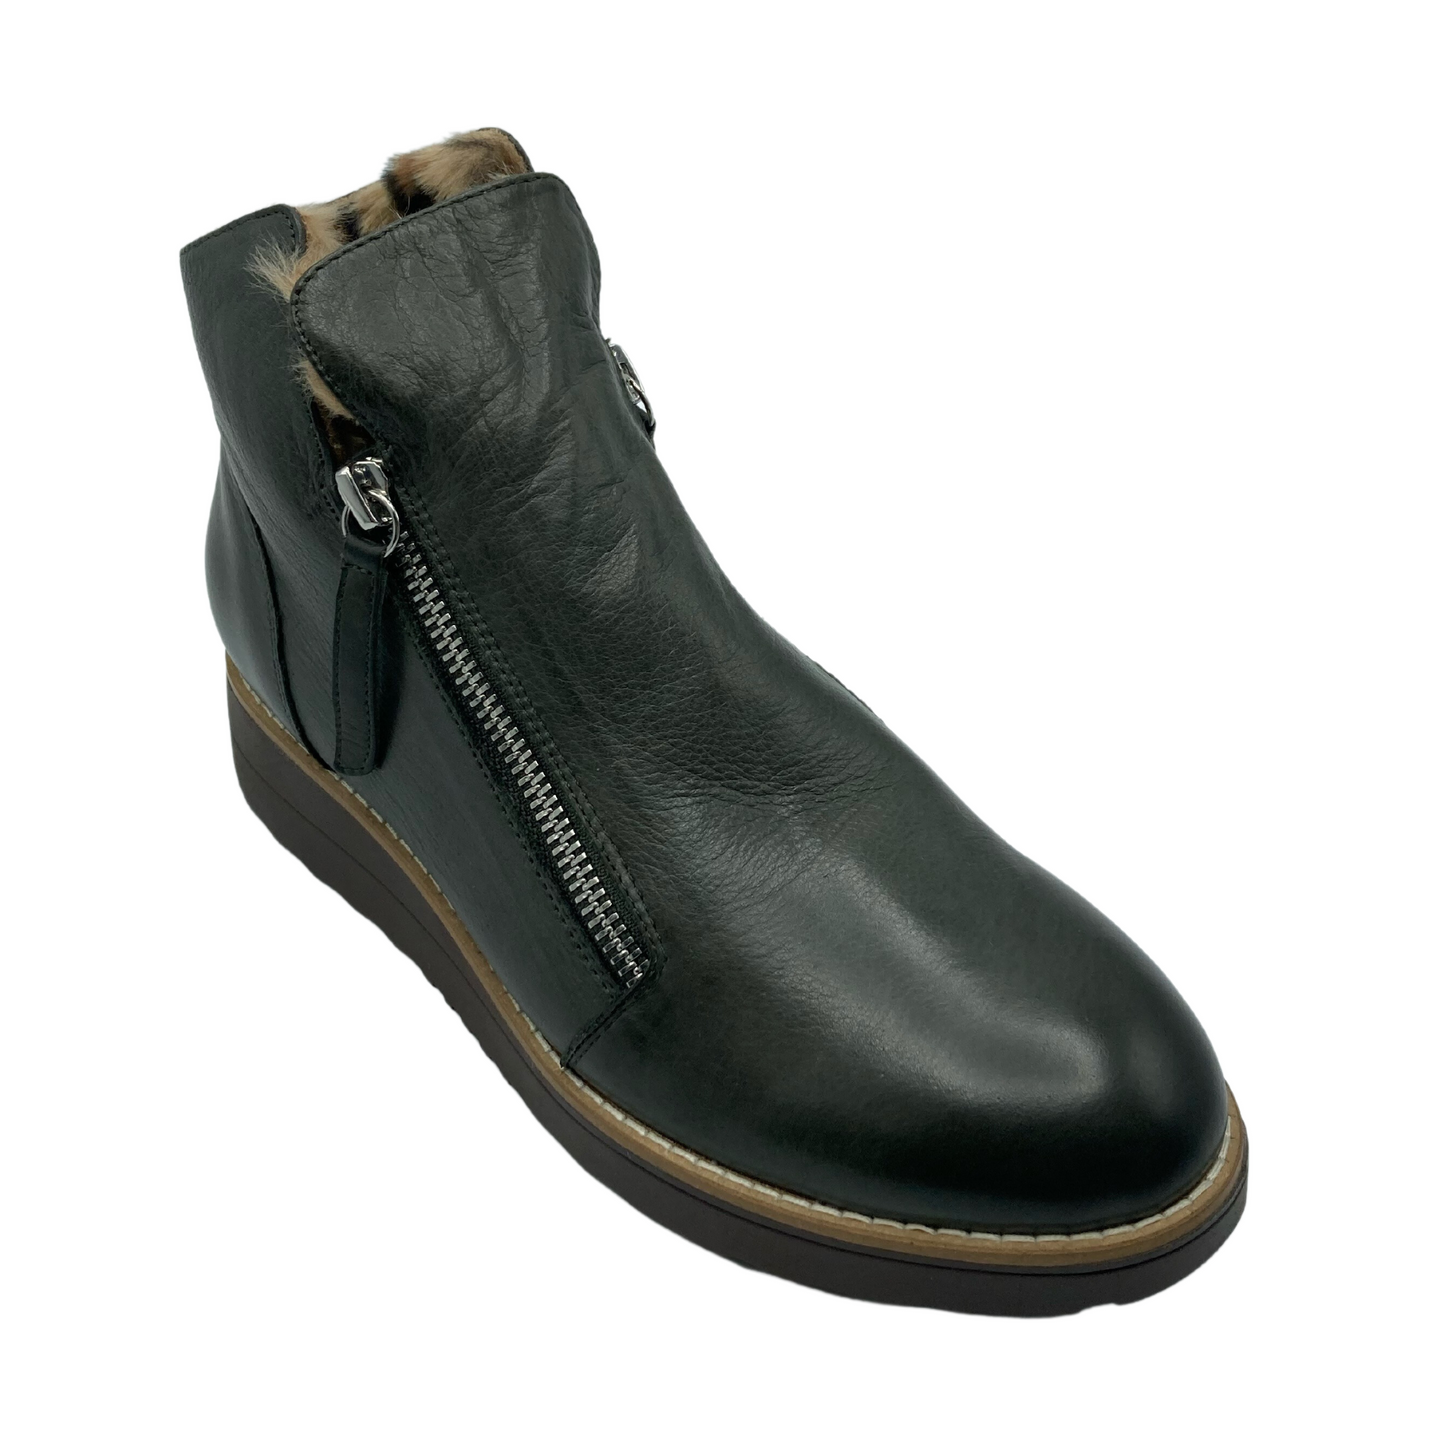 45 degree angled view of dark green leather boot with double zipper closure and rounded toe